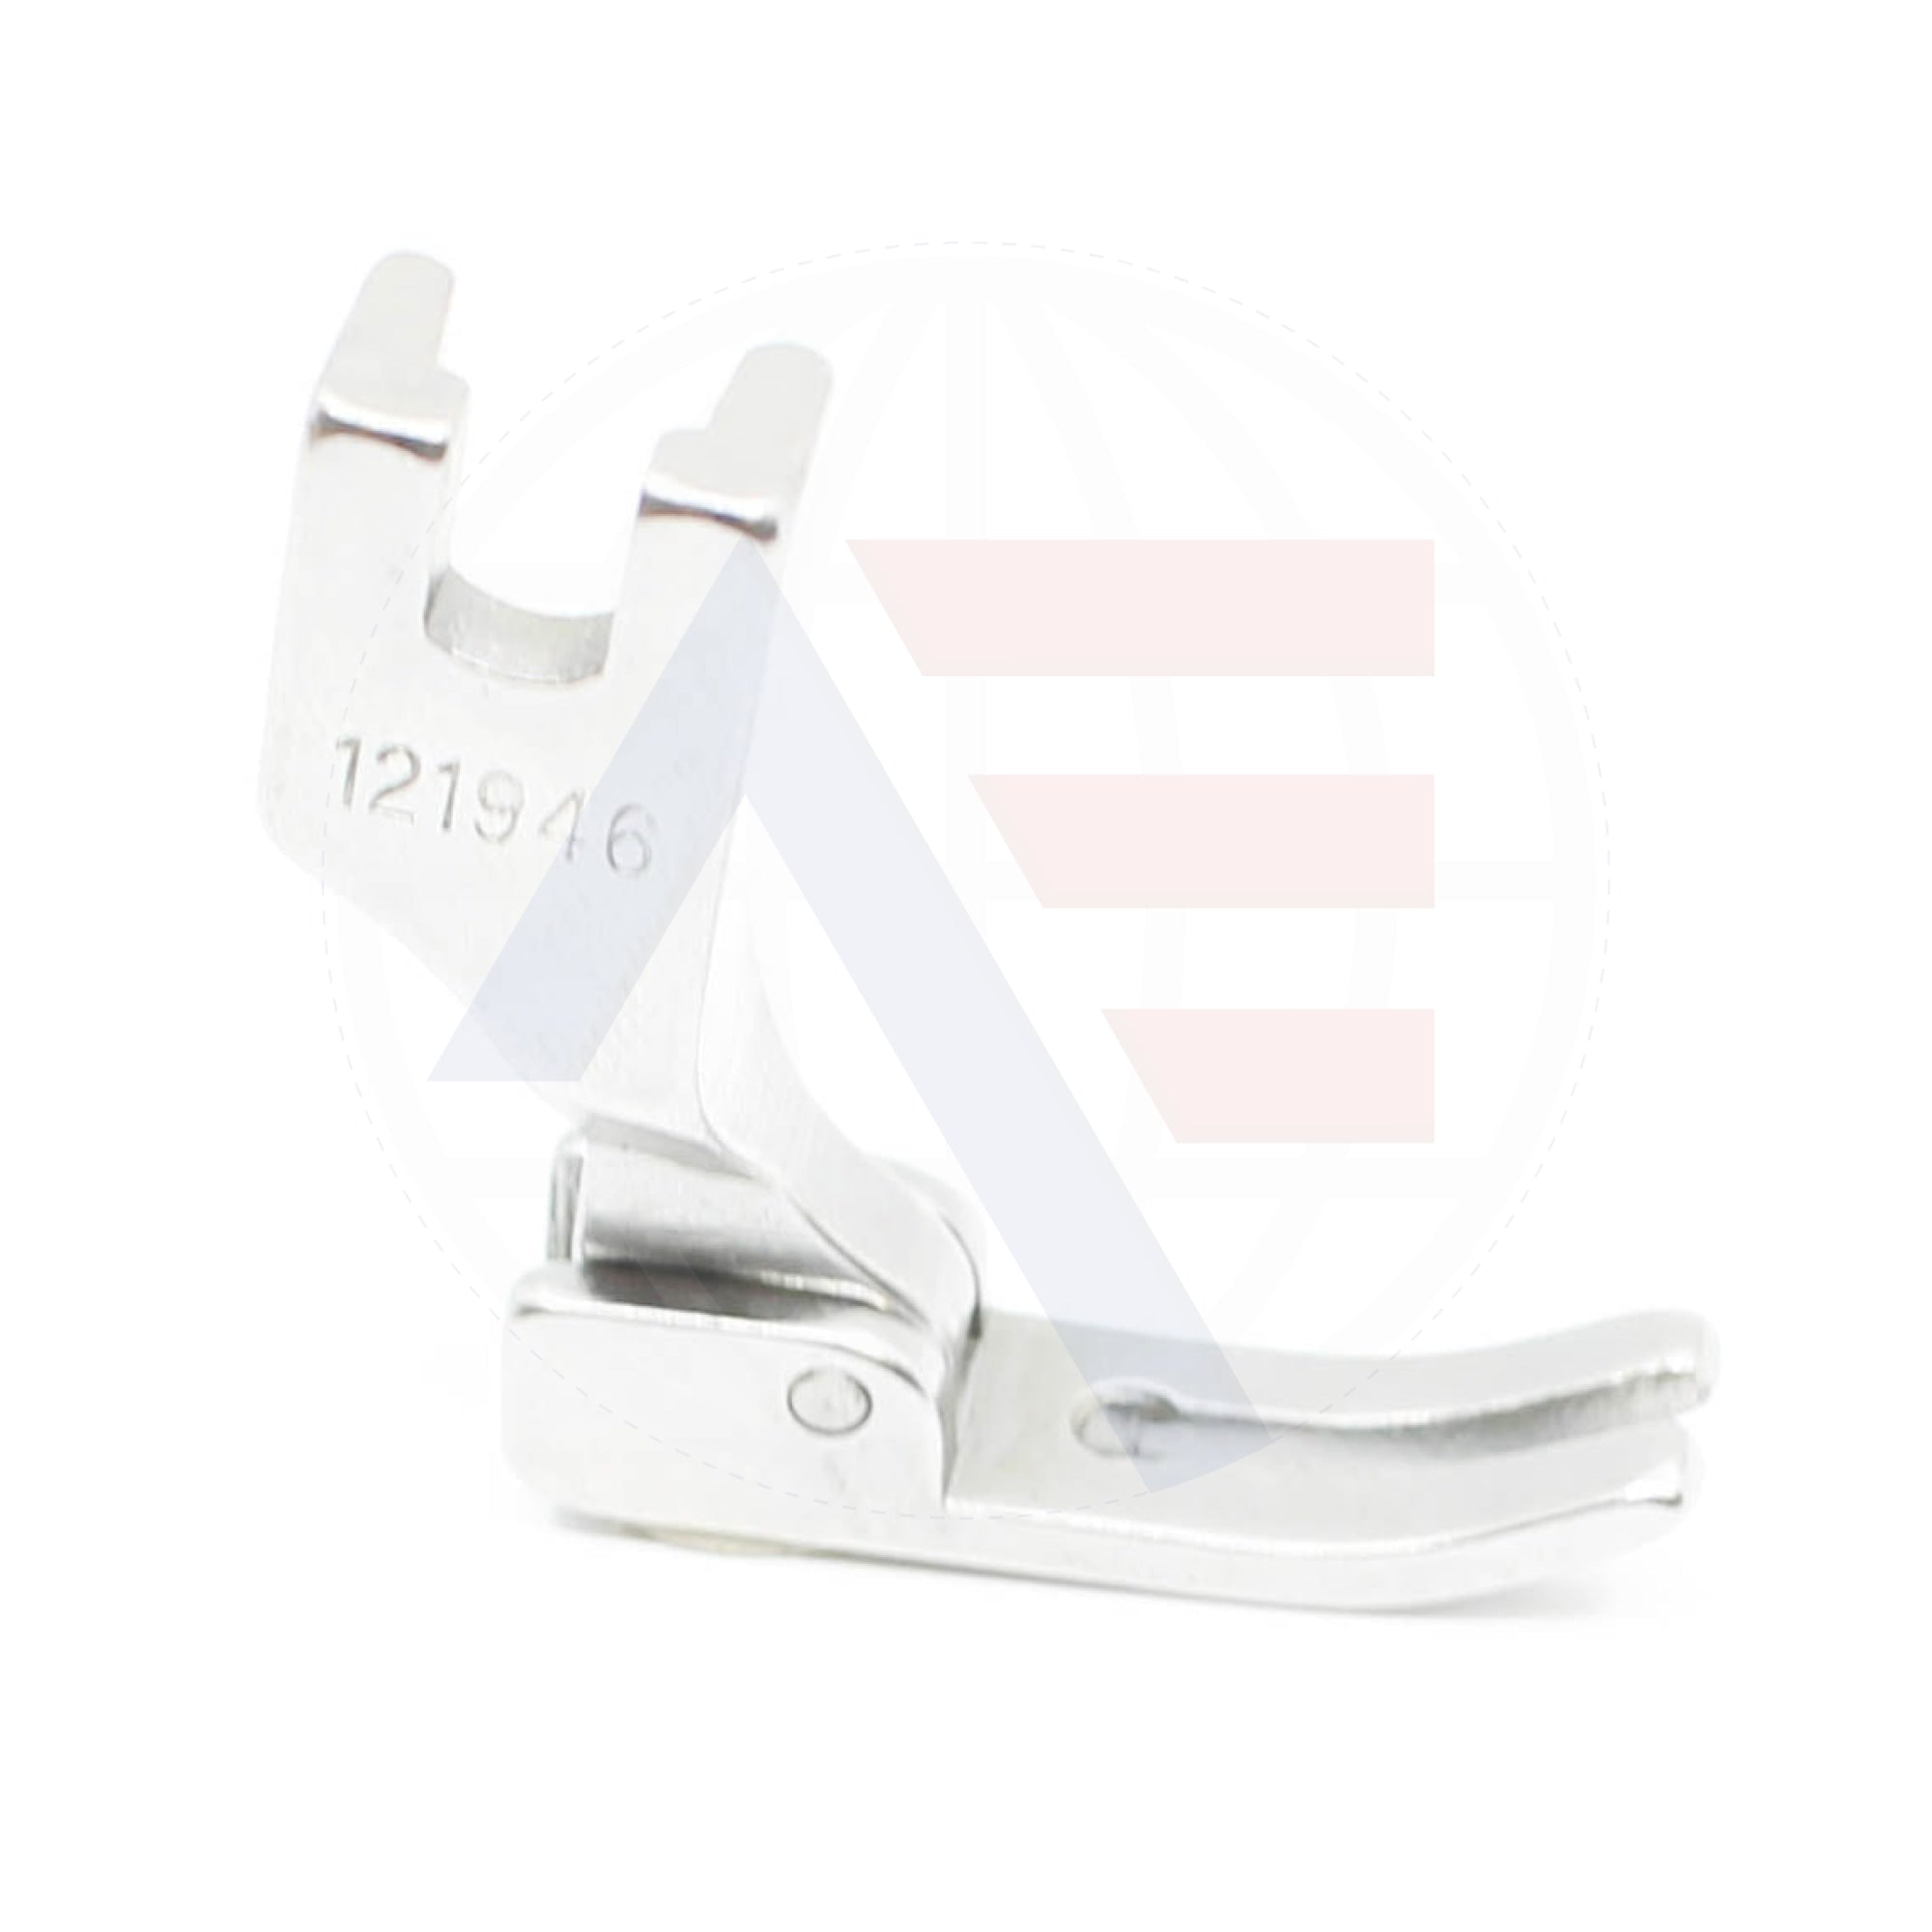 121946 Zip Foot Sewing Machine Spare Parts